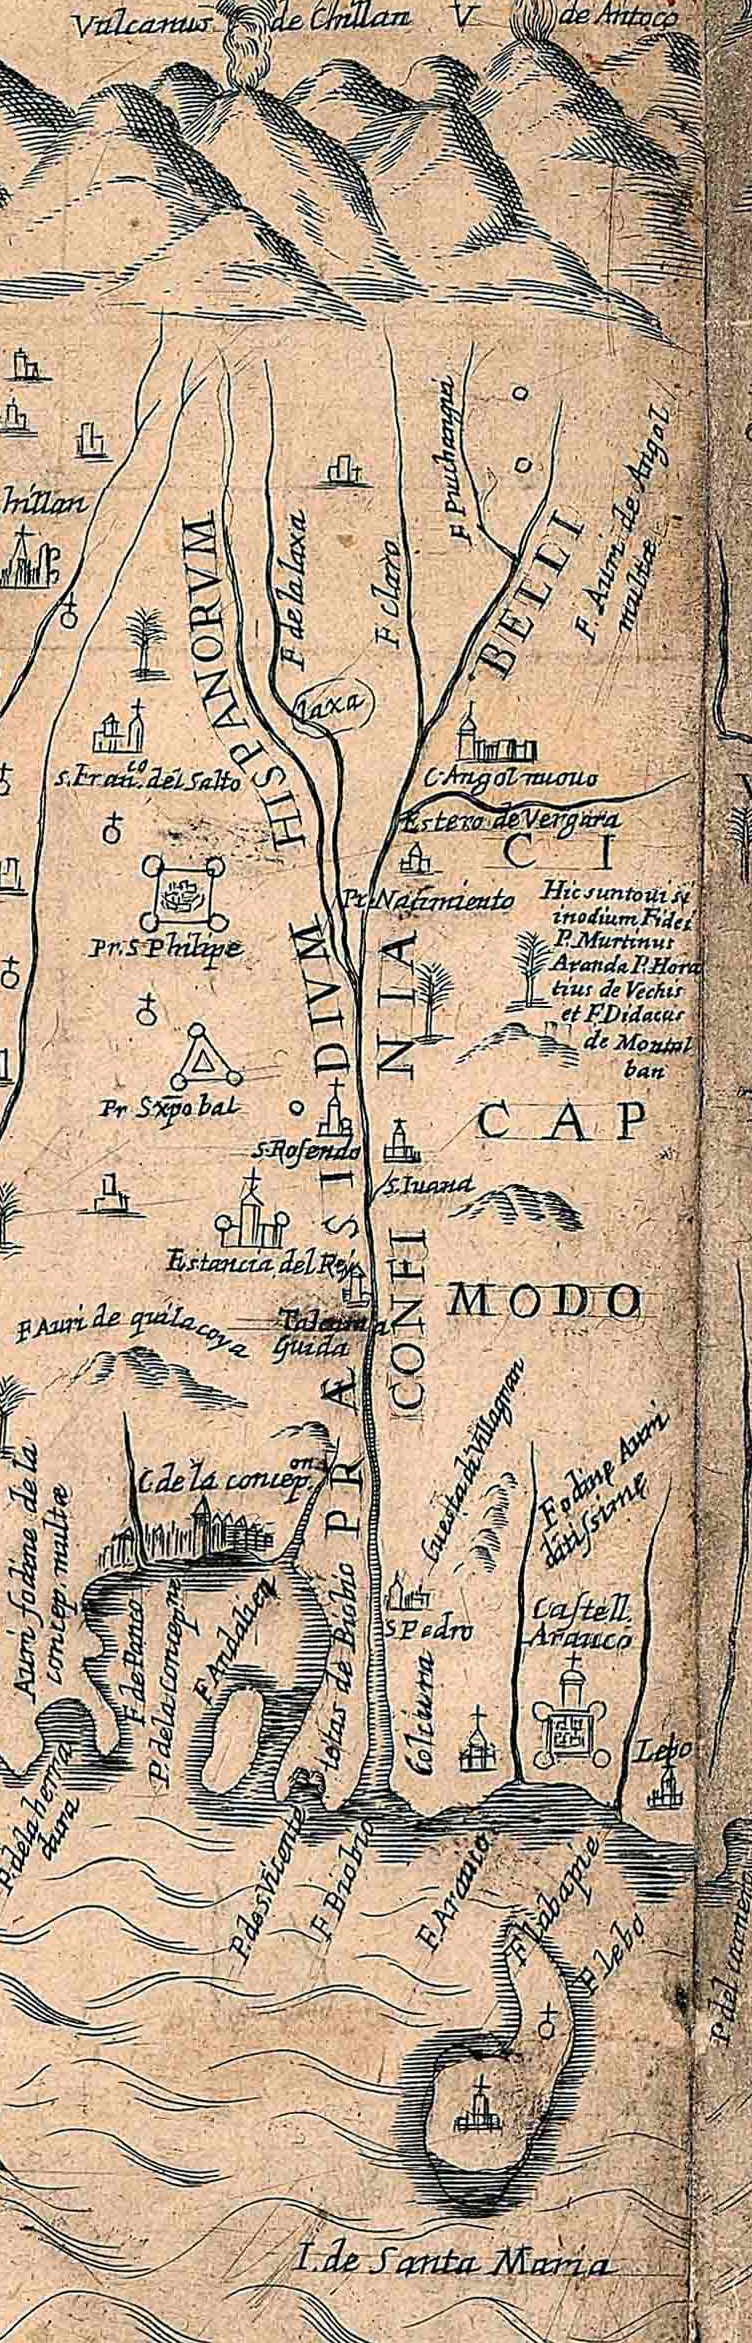 Forts along the Biobíio River. Detail of Alonso de Ovalle, Tabula geographica regni Chile, 1646. Image from the John Carter Brown Library, Brown University, Providence, Rhode Island.